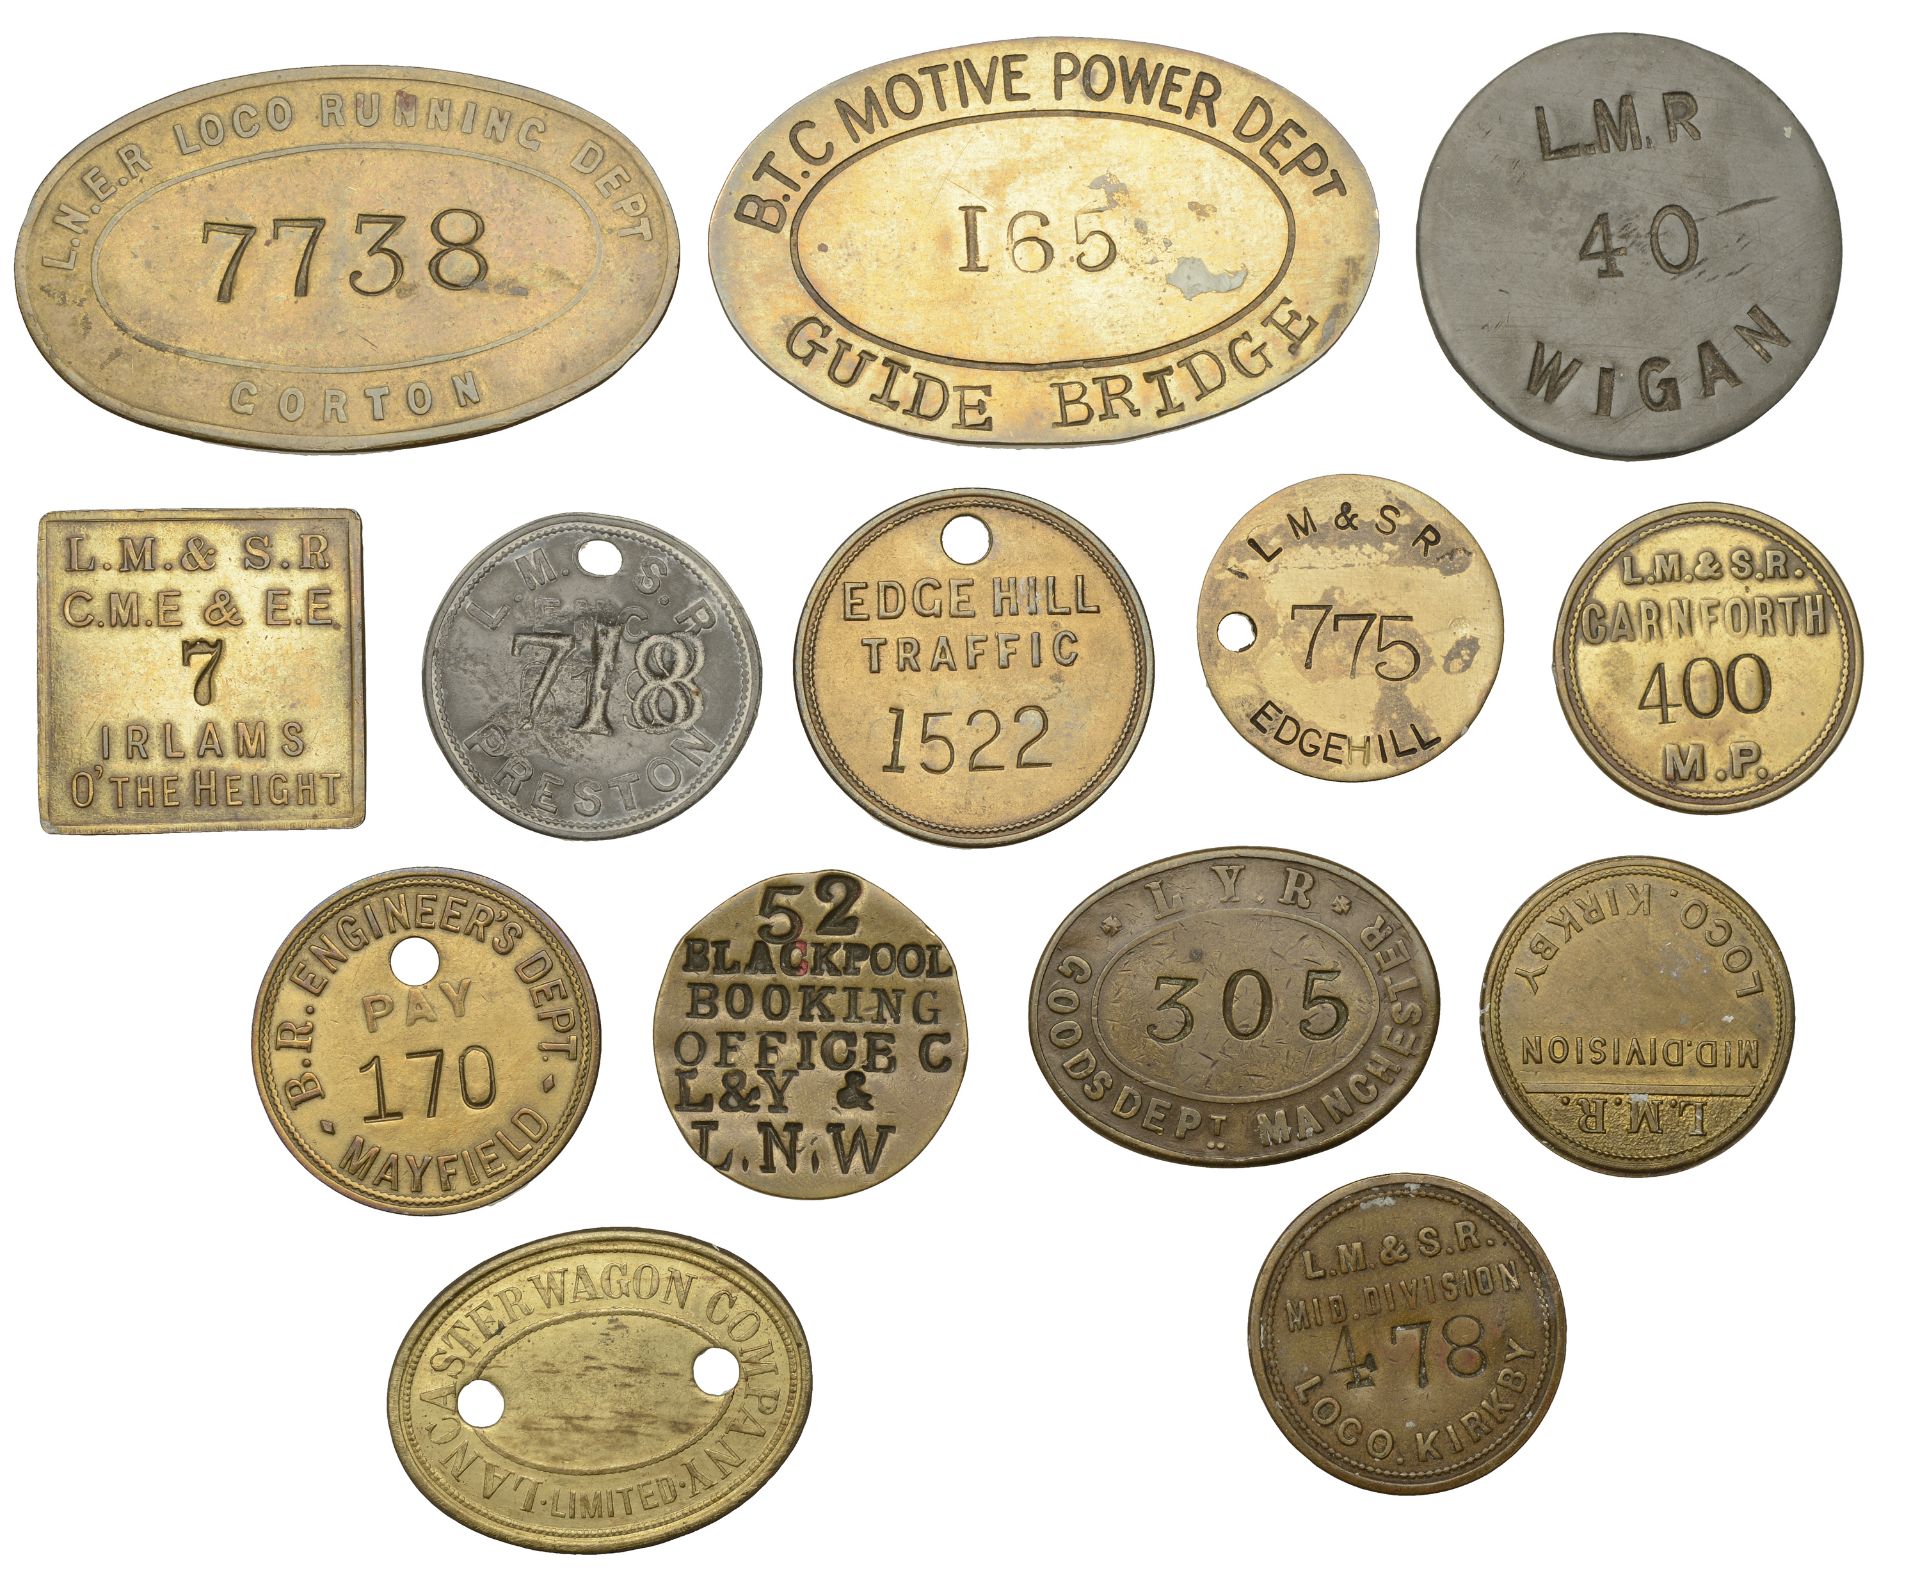 Miscellaneous Tokens and Checks, LANCASHIRE, Blackpool, Blackpool Booking Office, L[ancashir...